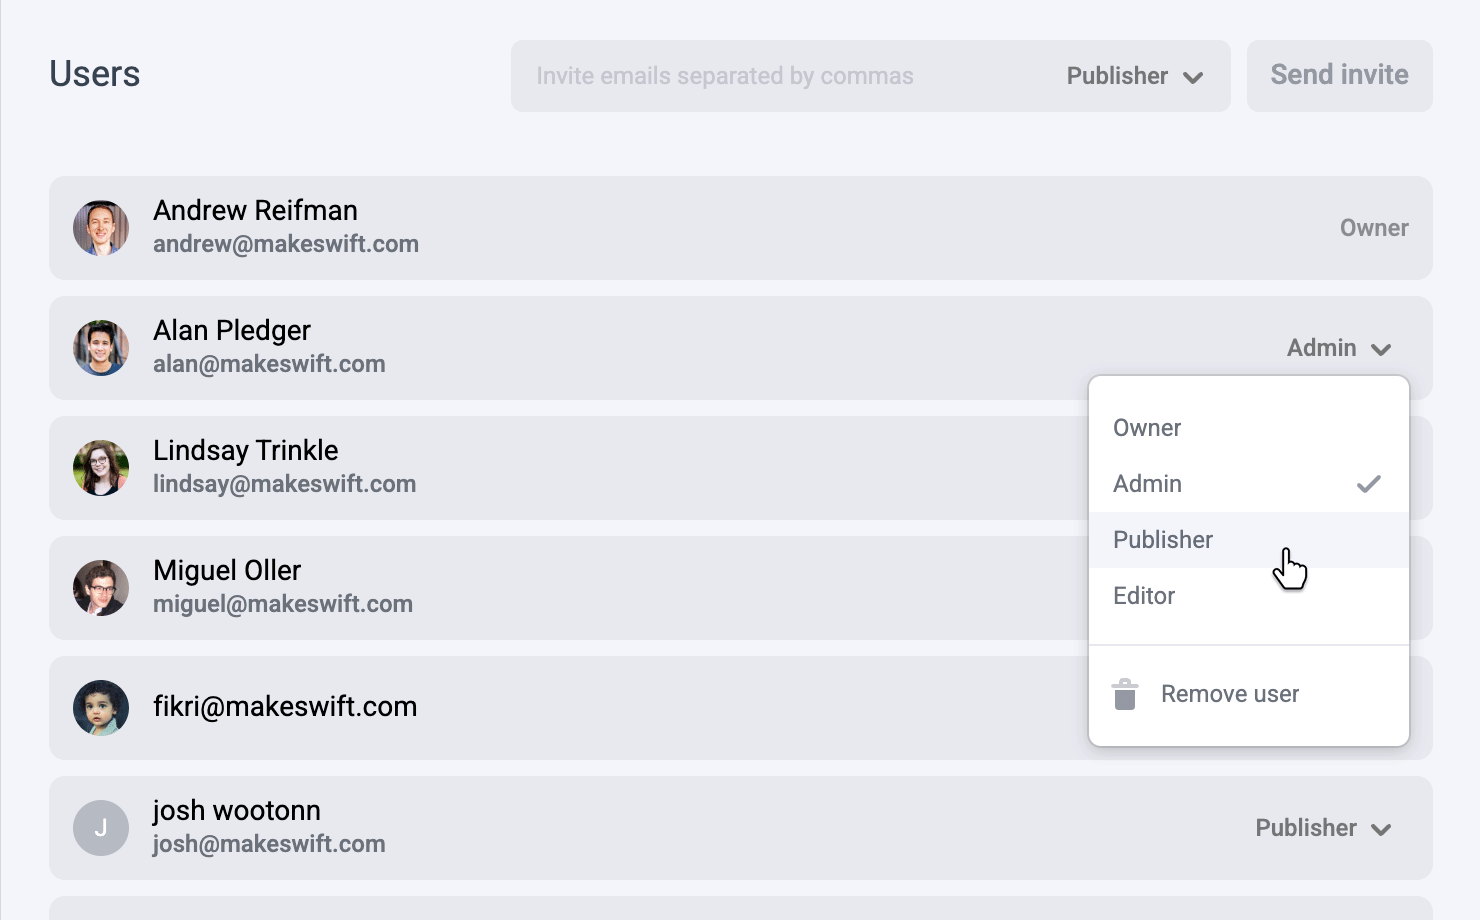 Users UI from Makeswift settings